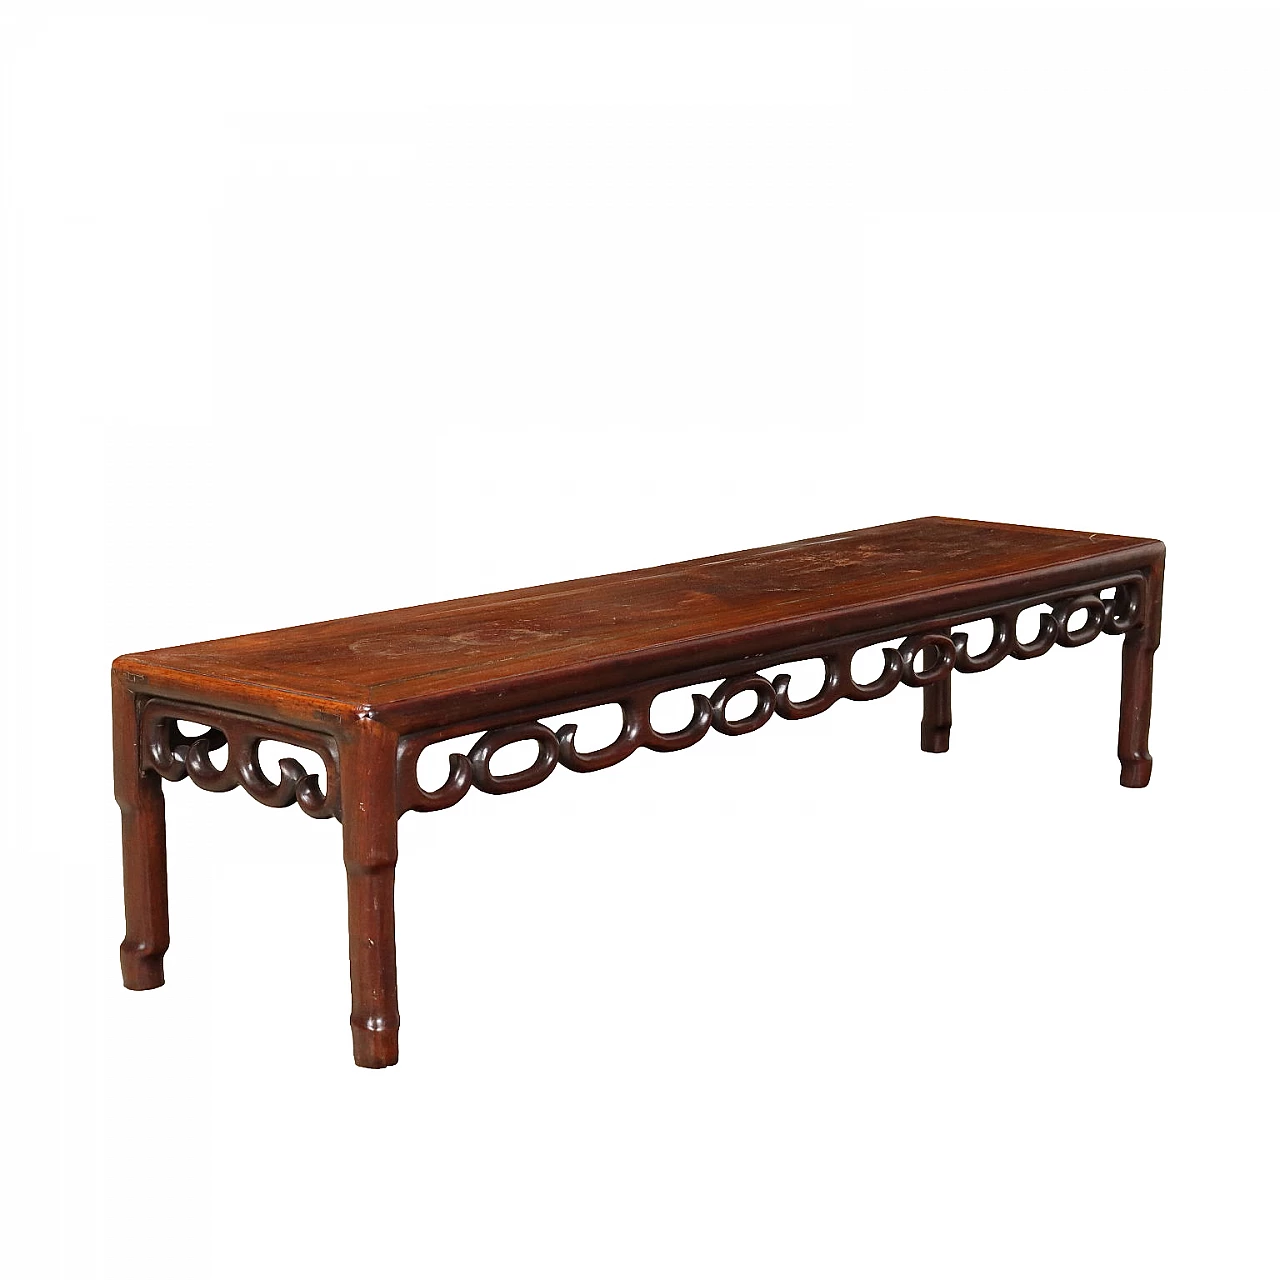 Carved and pierced wooden coffee table 1